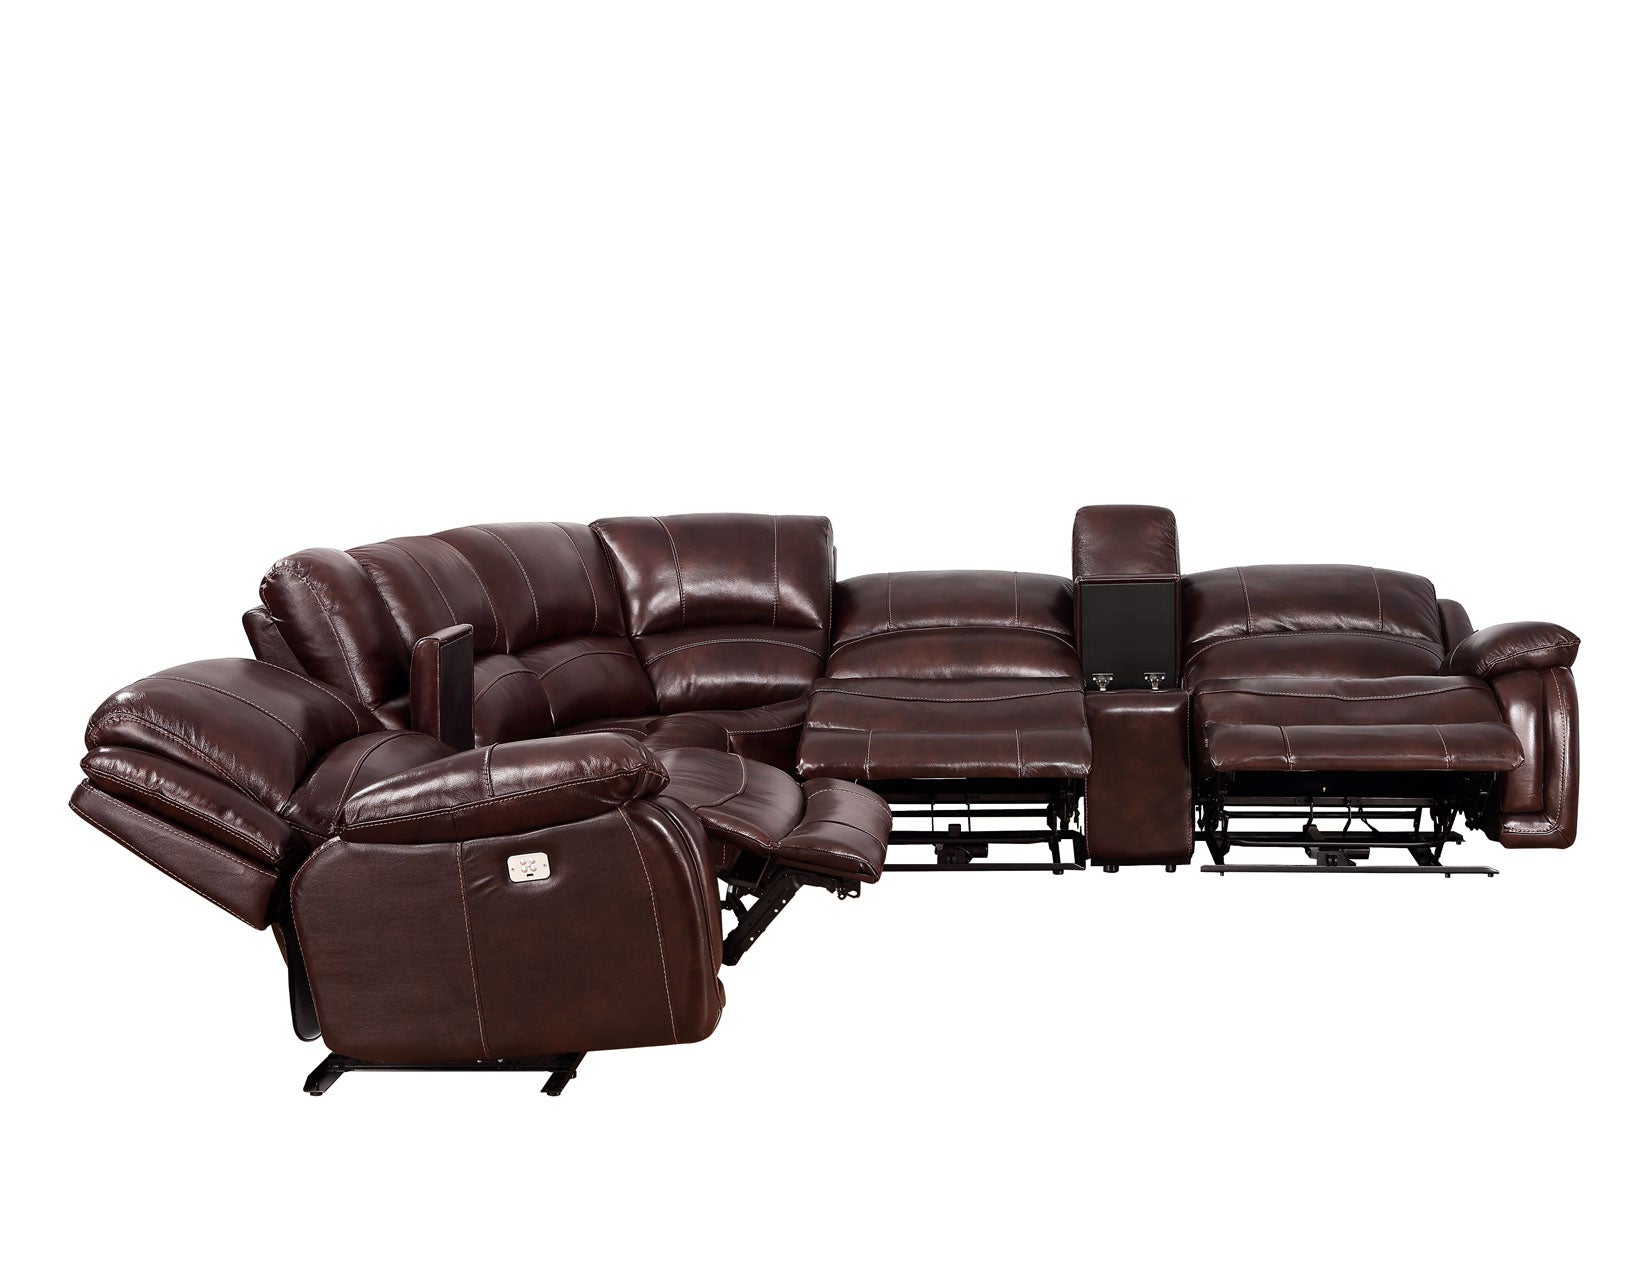 Denver Dual-Power 7-Piece Leather Sectional, Brown by Steve Silver